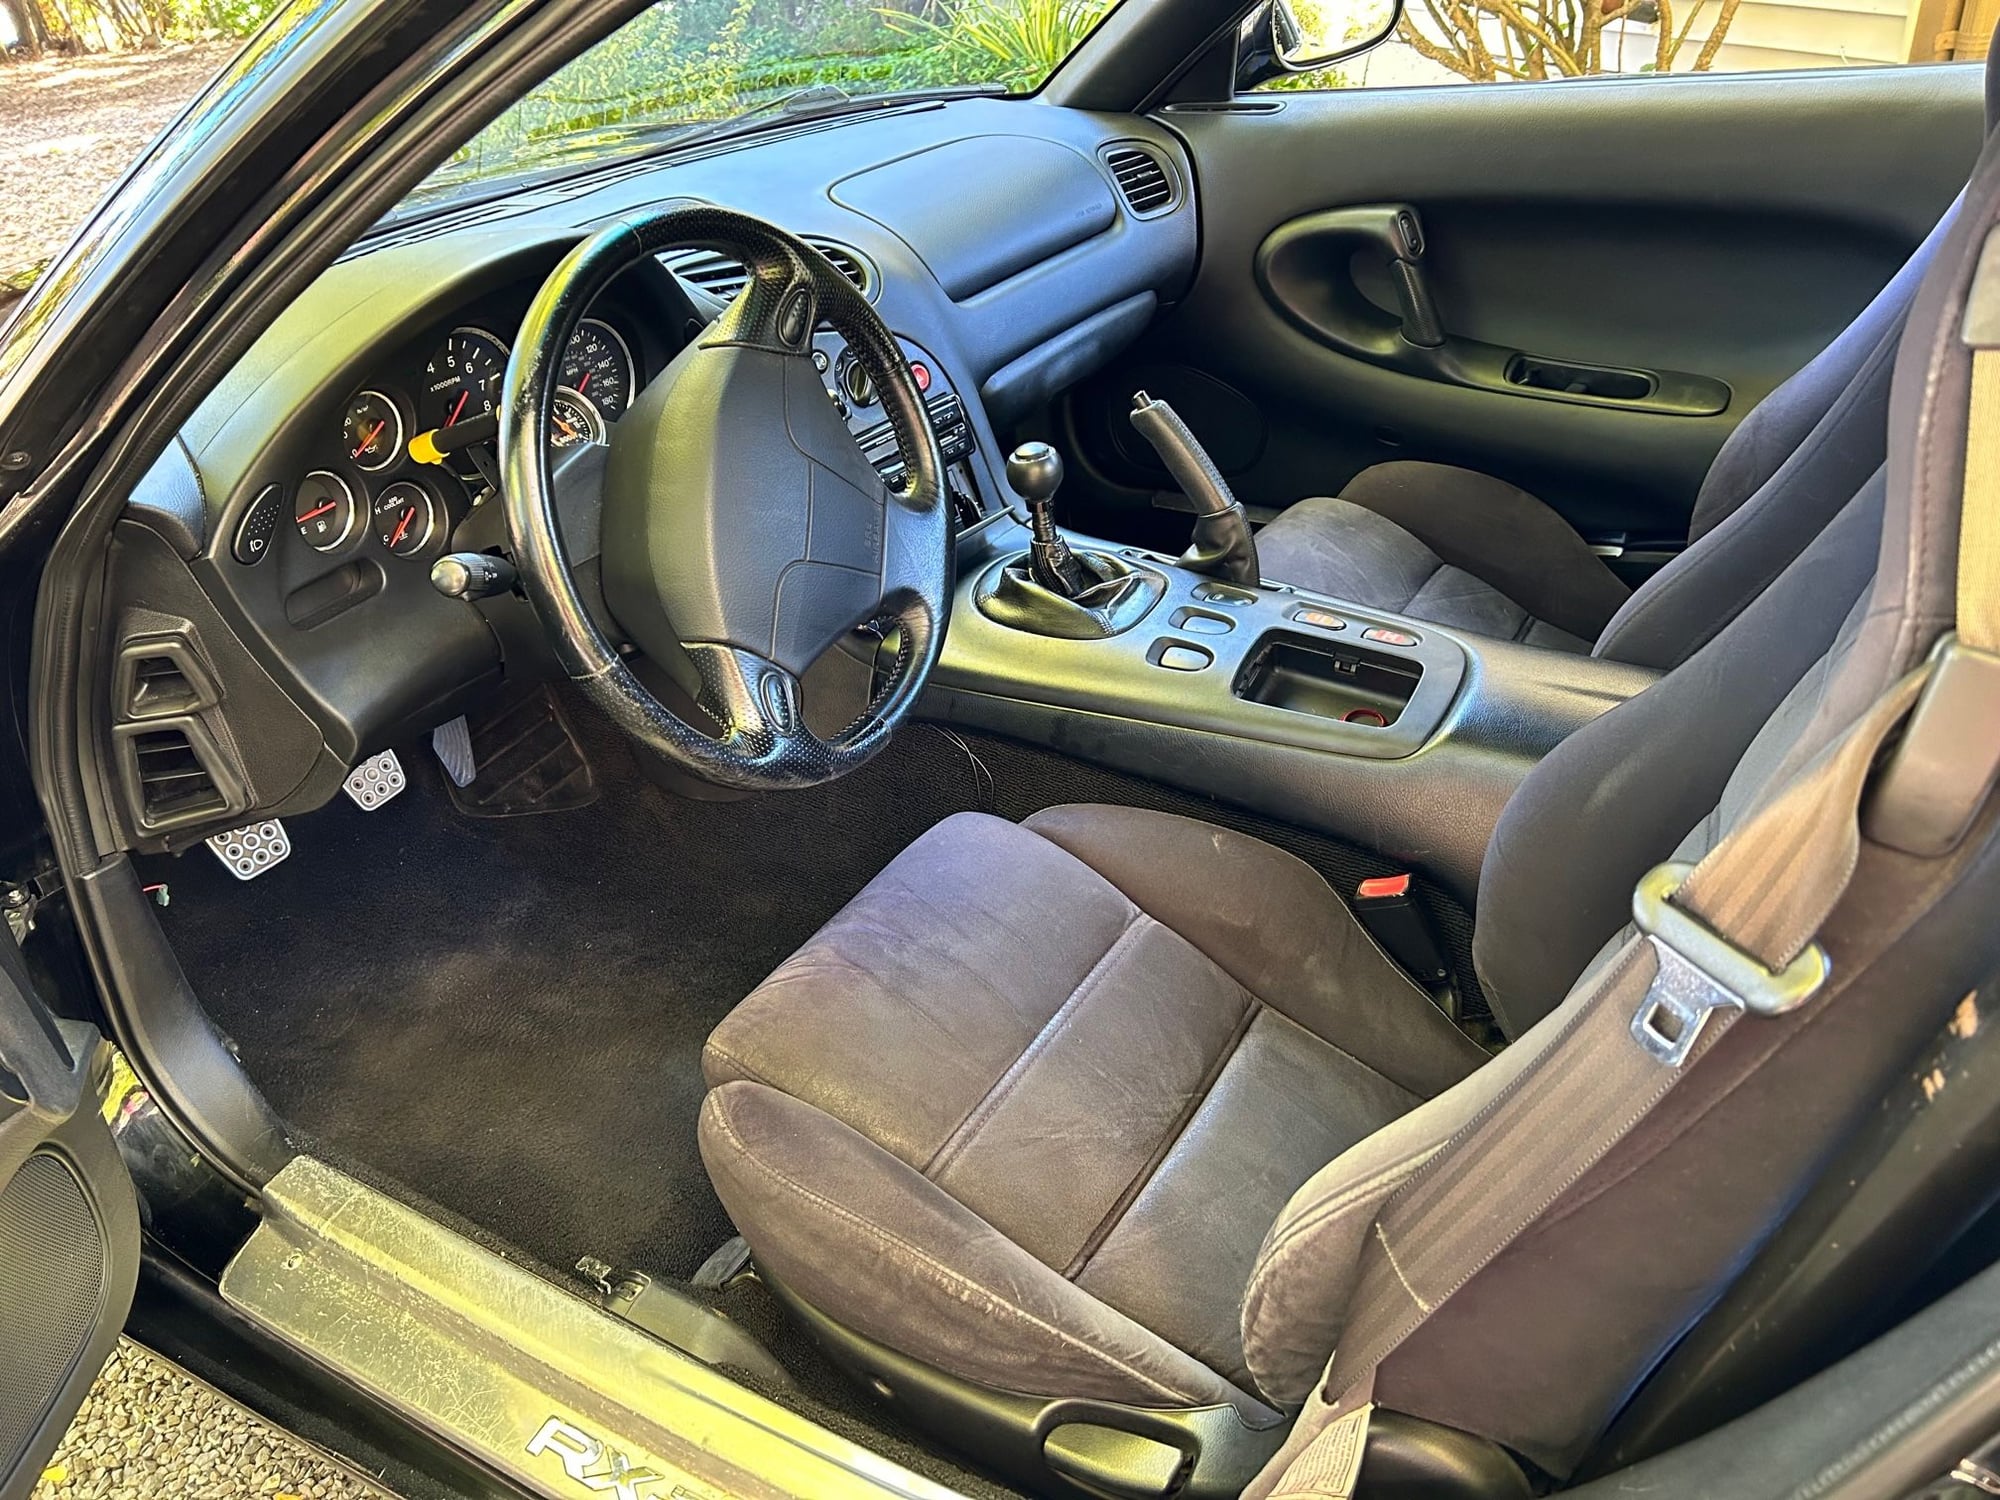 1994 Mazda RX-7 - RARE 1994 Mazda RX-7 R2 Model 1 of only 156 Made! - Used - VIN JM1FD3338R0300775 - 85,550 Miles - 2WD - Manual - Coupe - Black - Middletown, NY 10940, United States